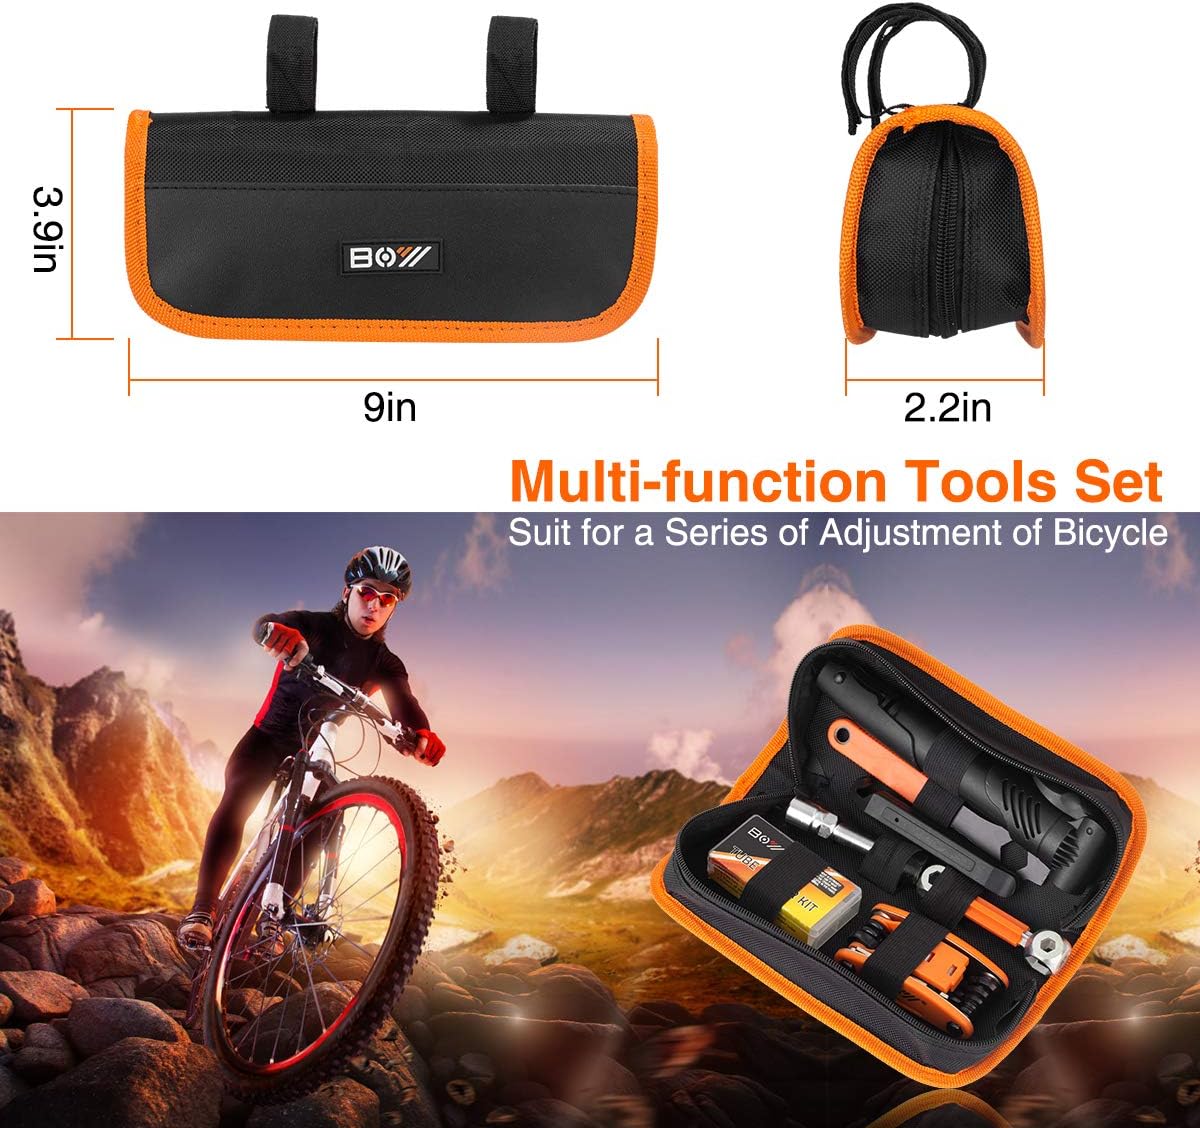 Bicycle Repair Bag & Bicycle Tire Pump, Home Bike Tool Portable Patches Fixes, Inflator, Maintenance for Camping Travel Essentials Tool Bag Bike Repair Tool Kit Safety Emergency All in One Tool